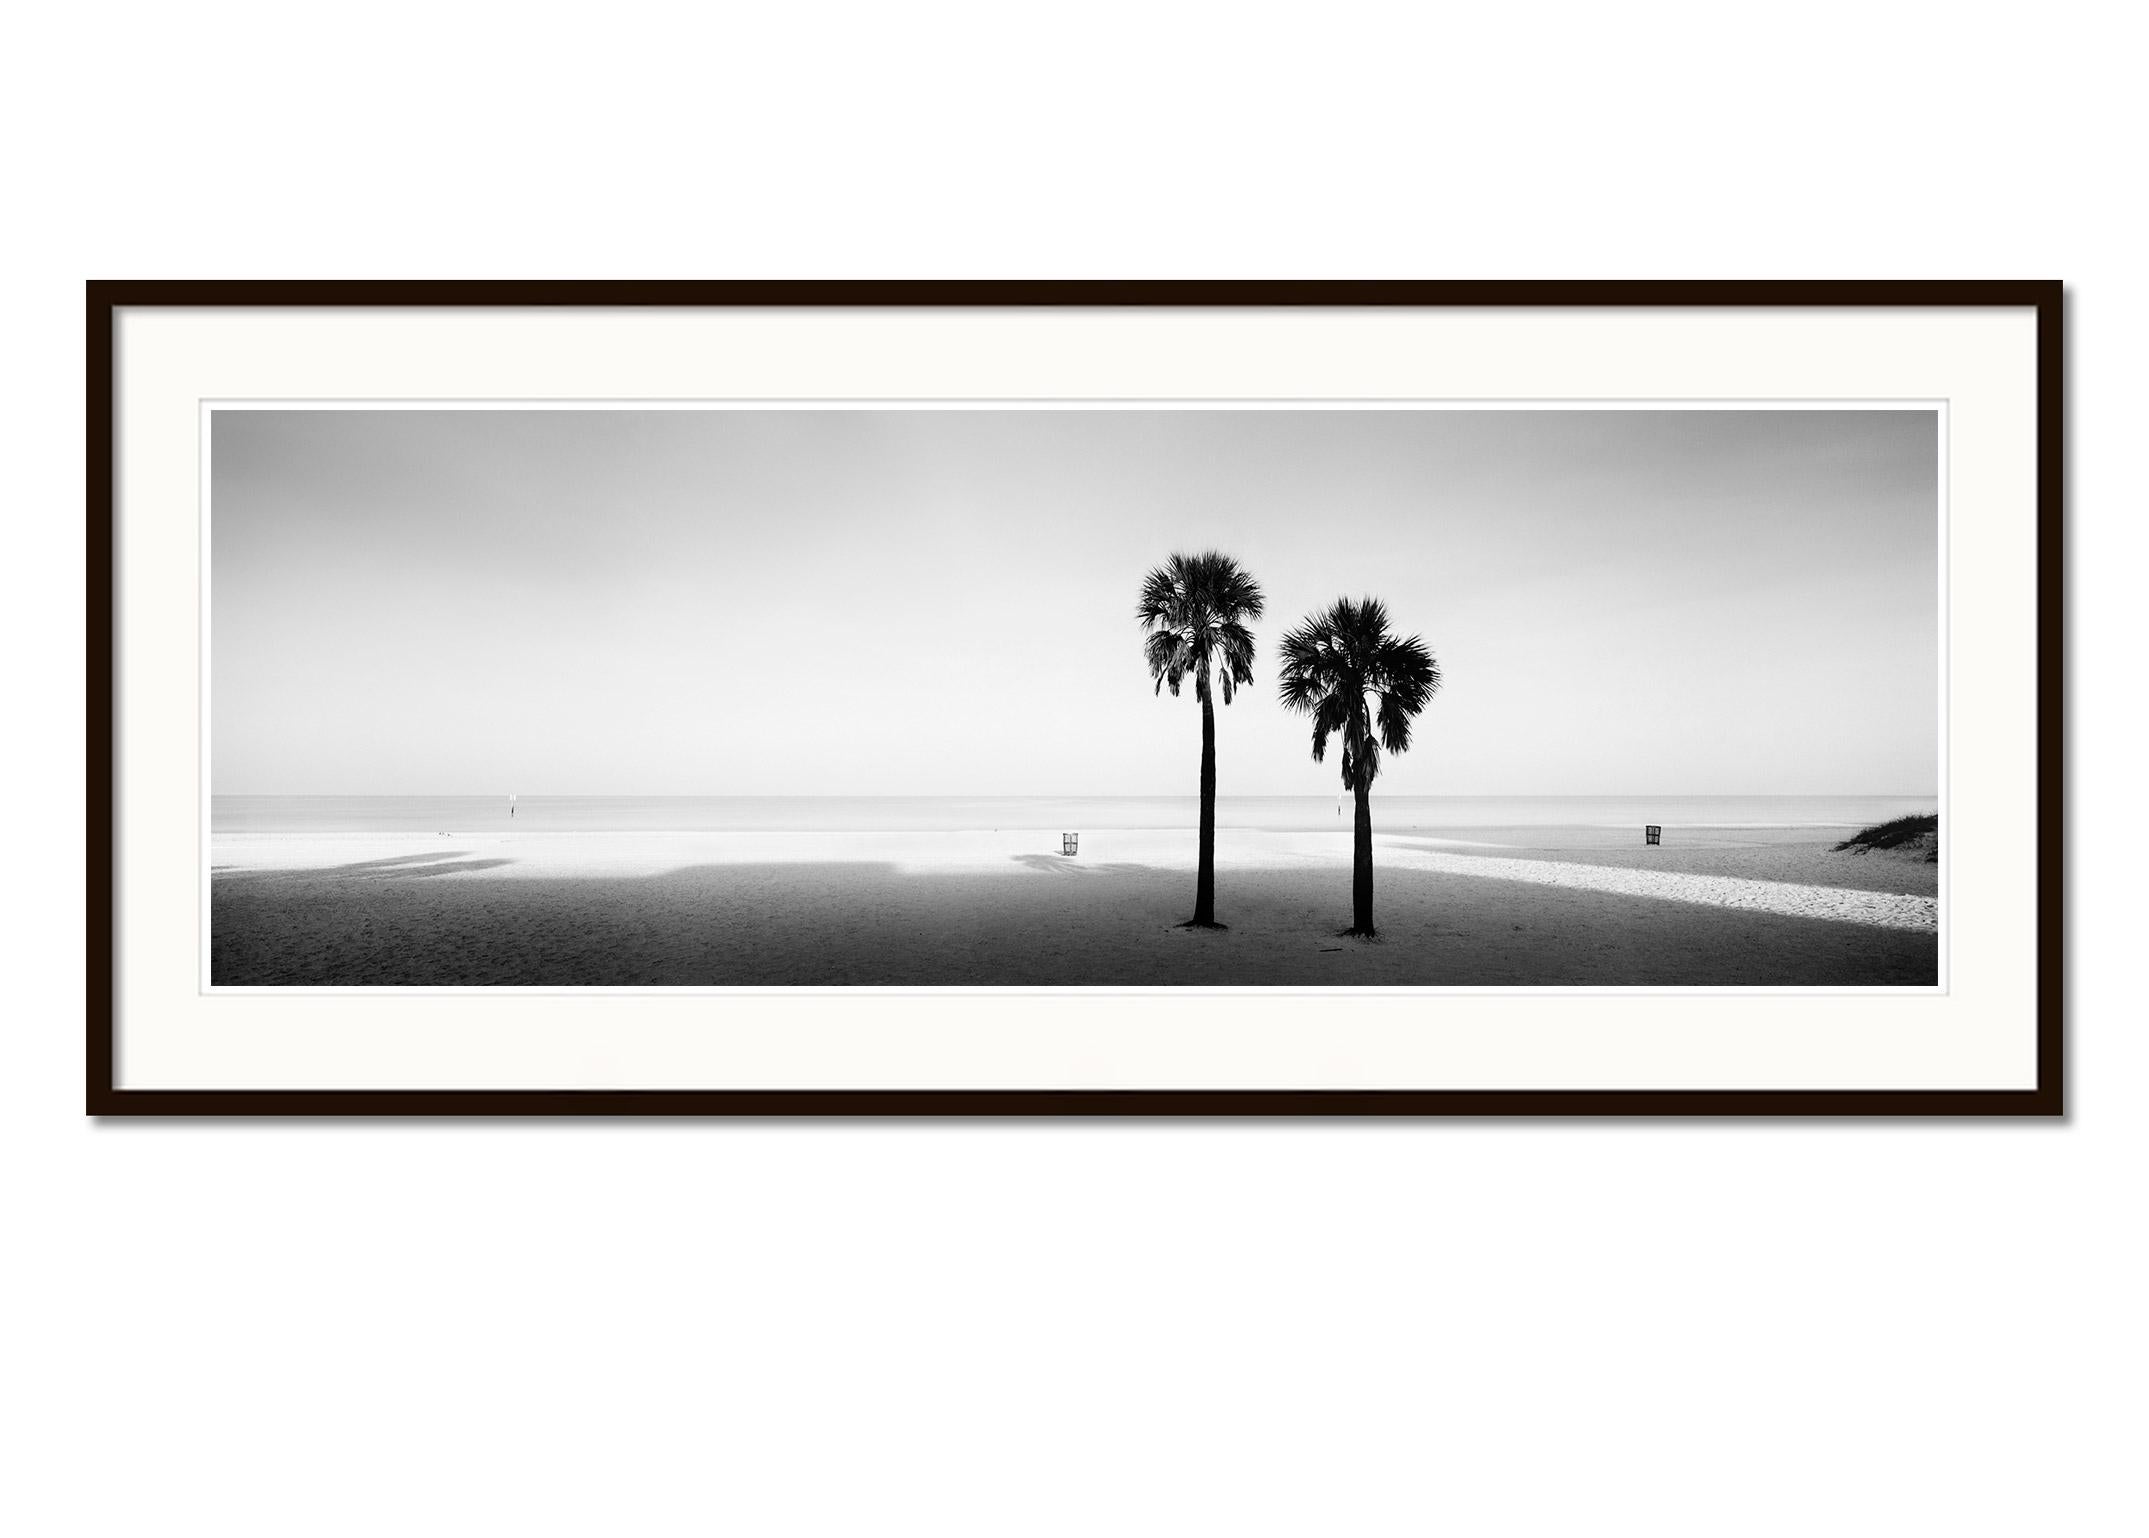 Black and white fine art panorama photography print. Two palm trees on the beautiful beach in Florida, USA. Archival pigment ink print, edition of 7. Signed, titled, dated and numbered by artist. Certificate of authenticity included. Printed with